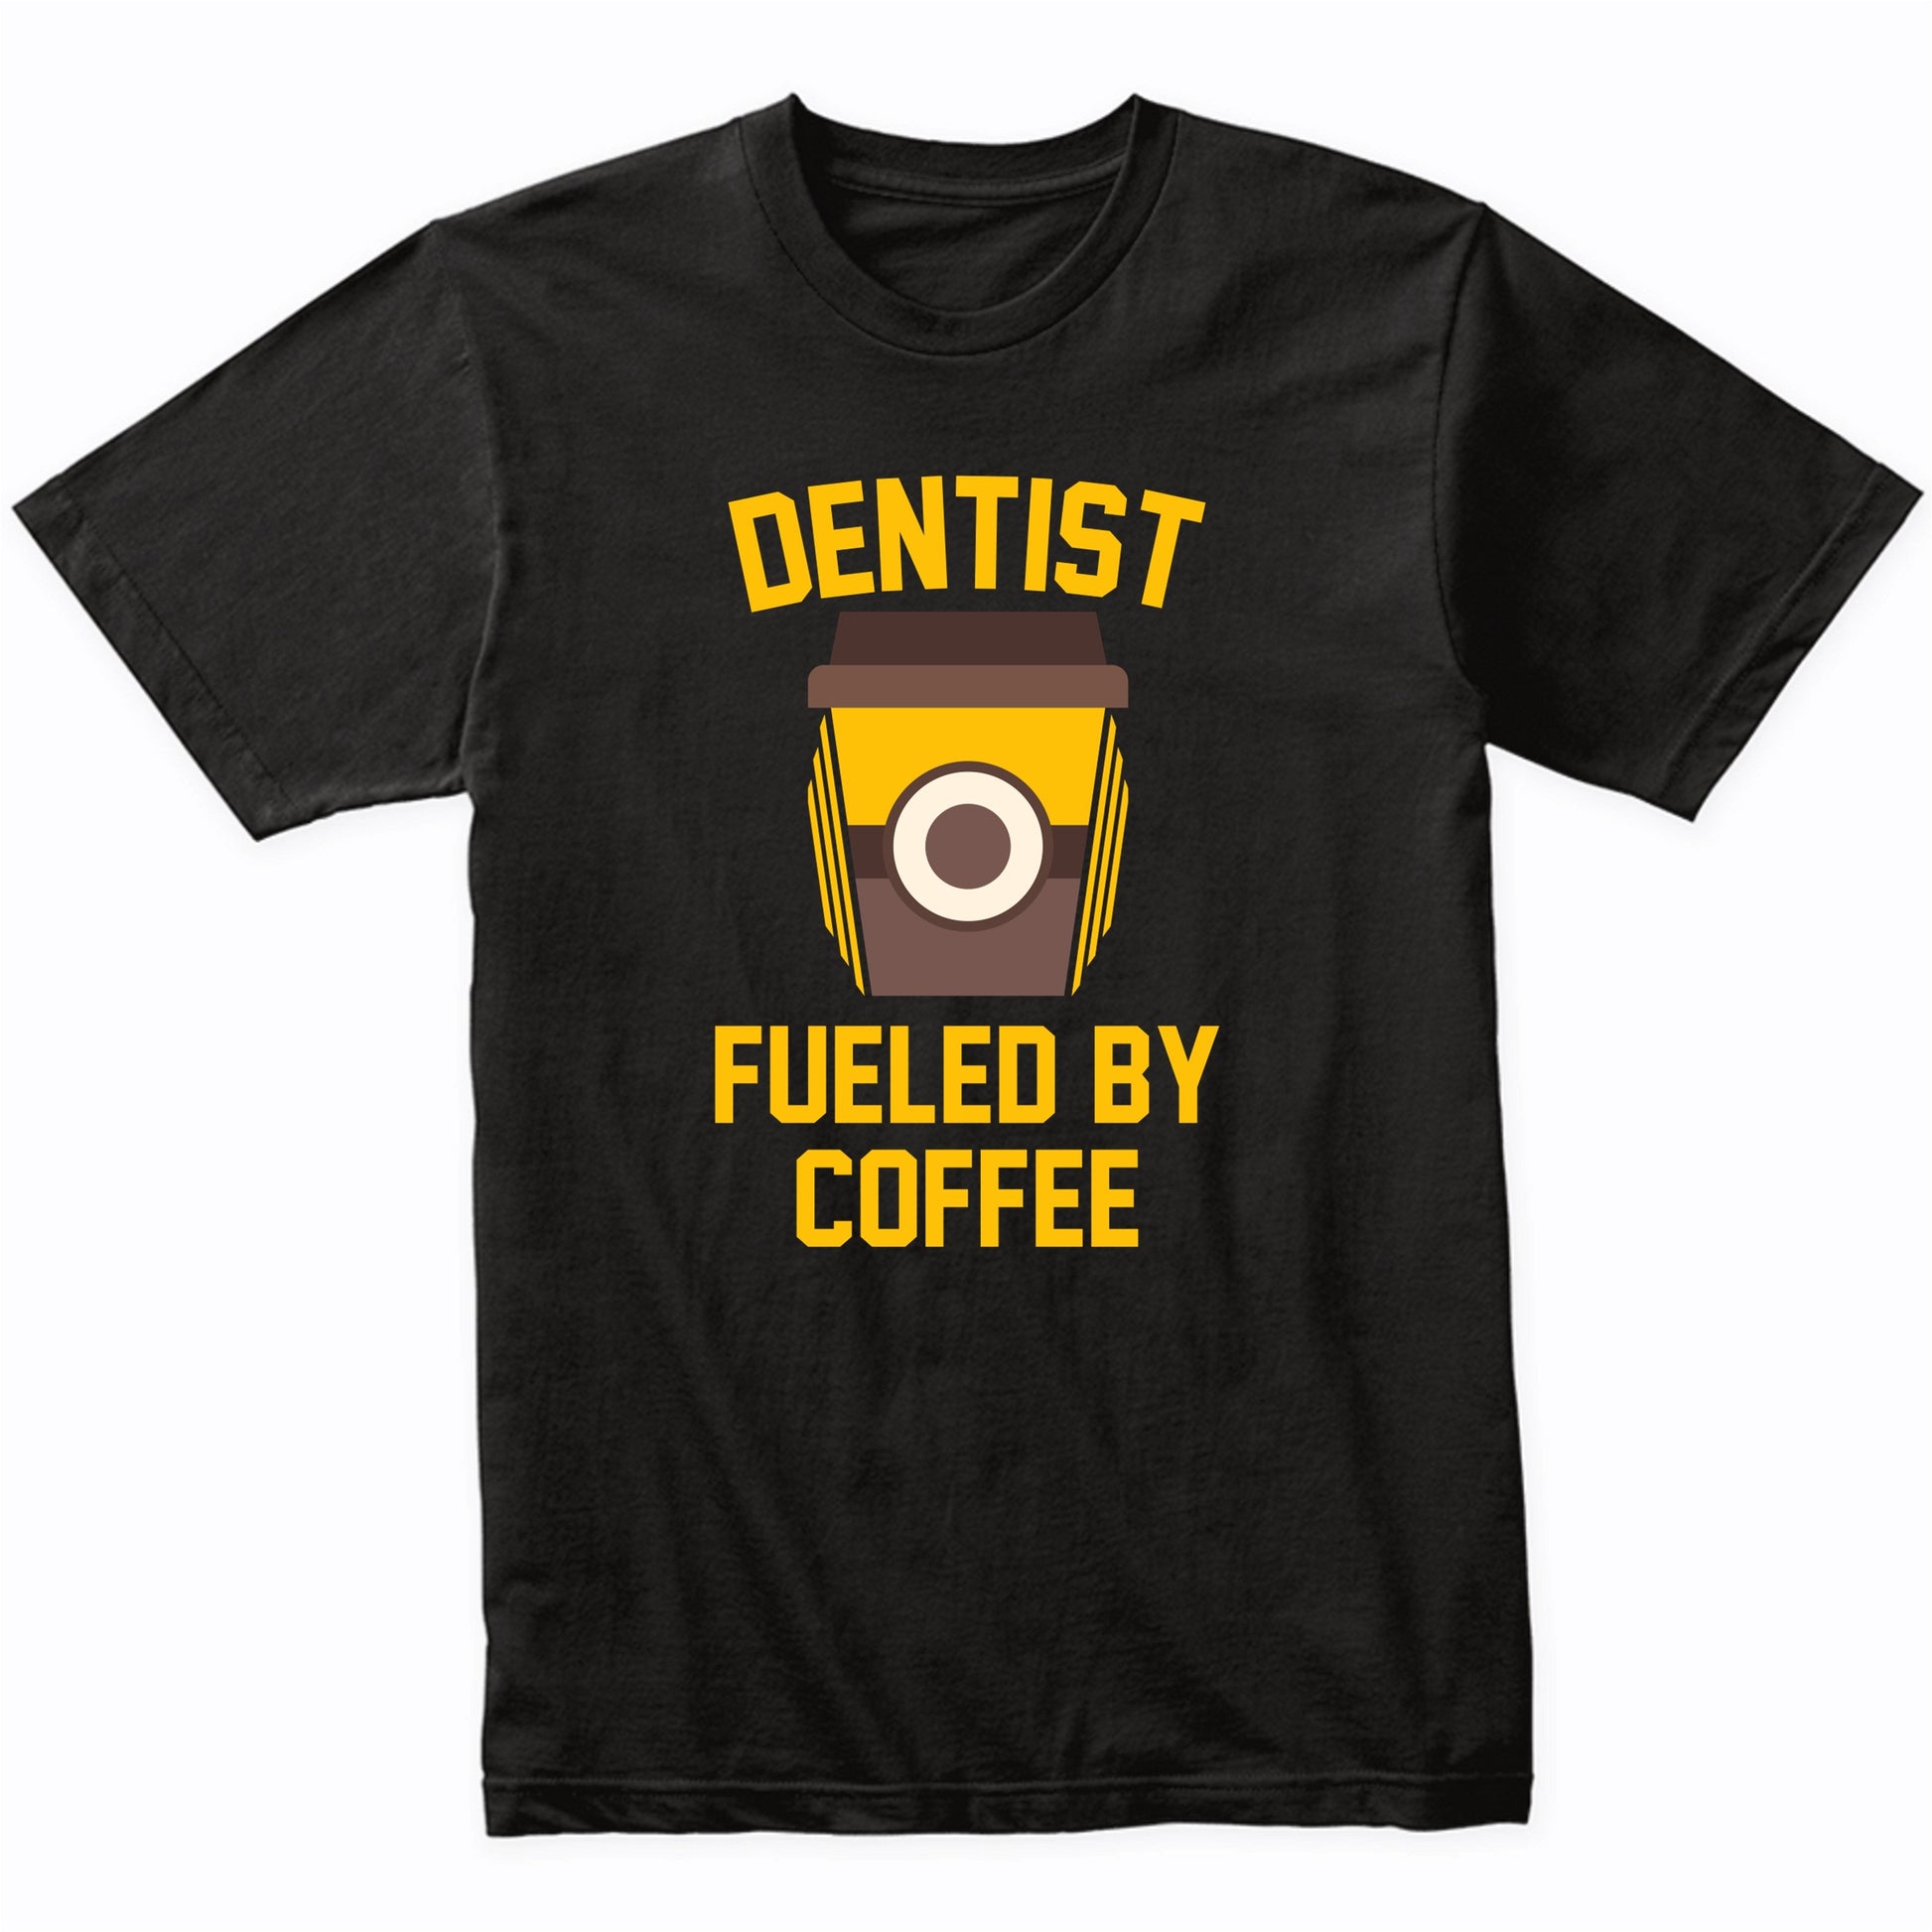 Dentist Fueled By Coffee Funny Shirt